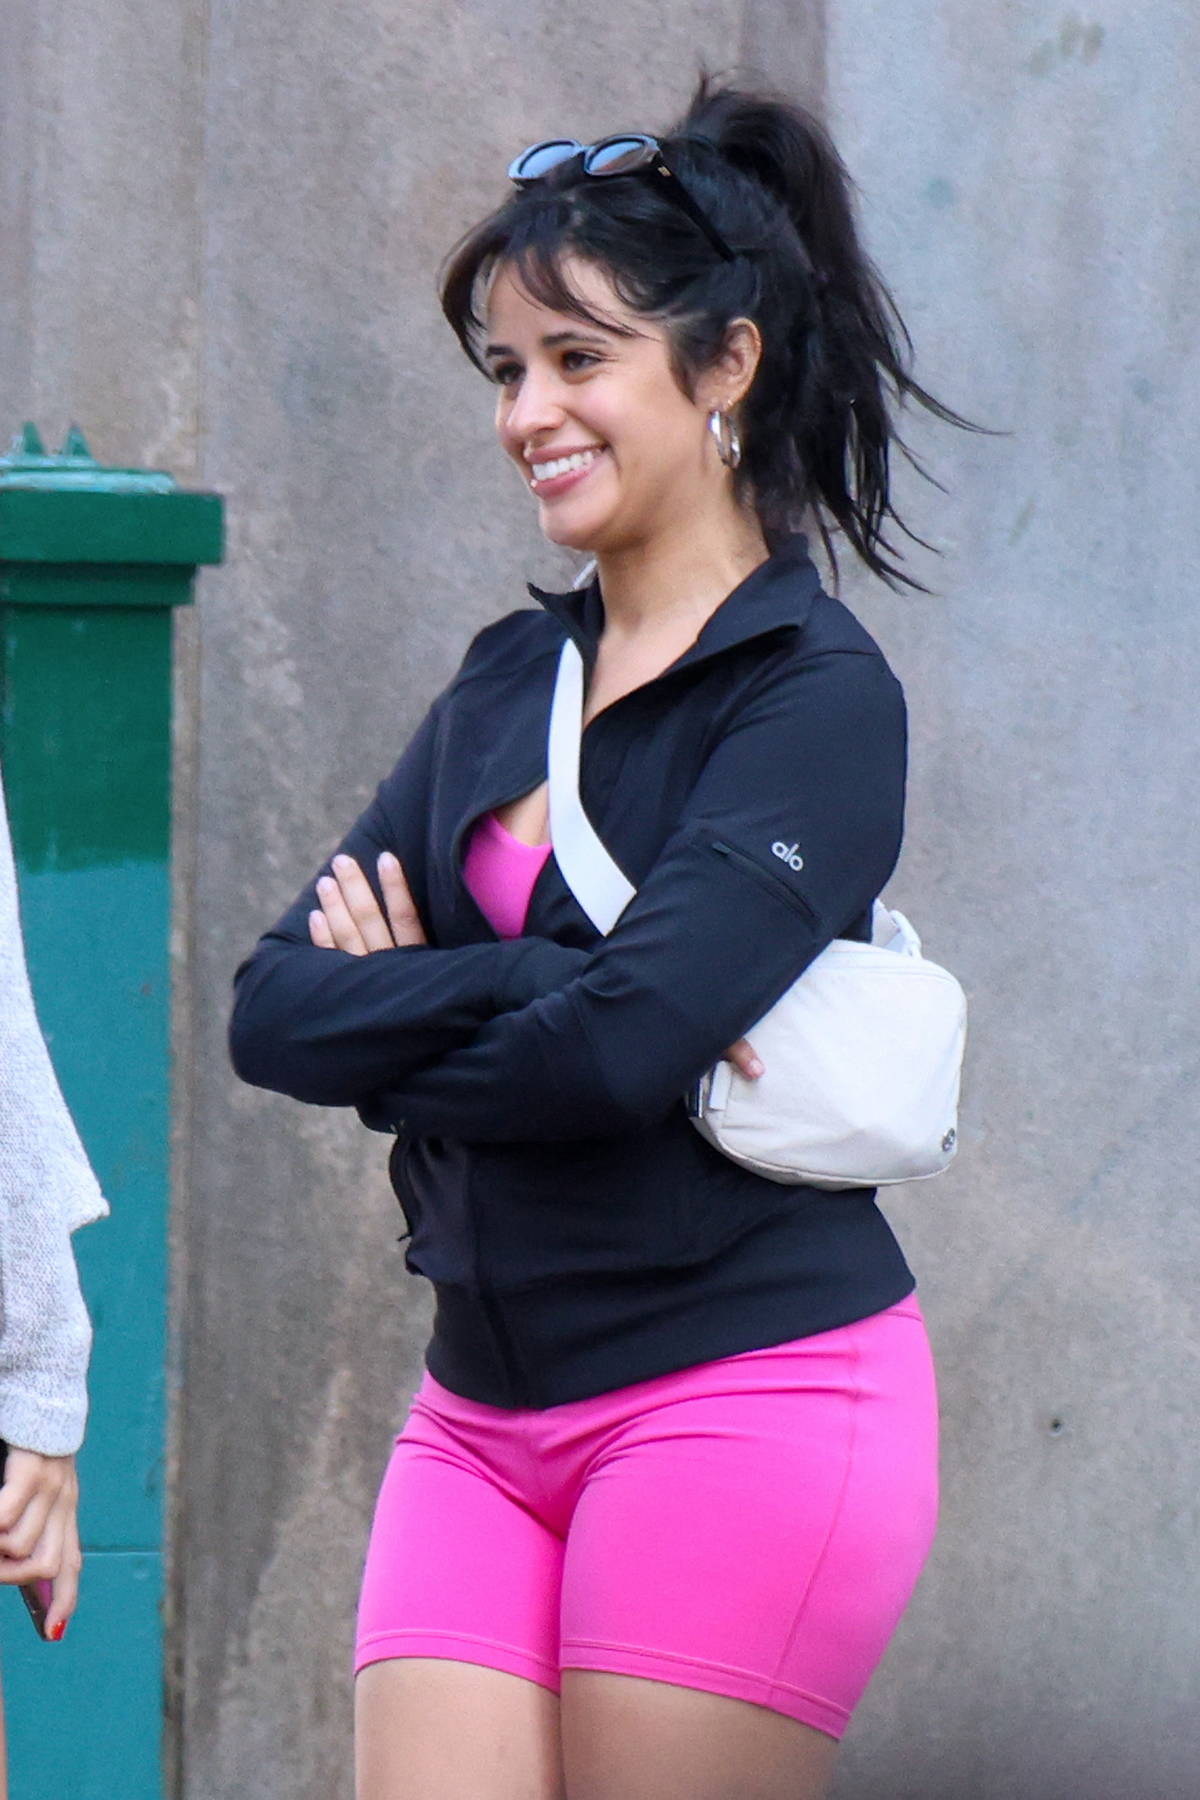 https://www.celebsfirst.com/wp-content/uploads/2023/05/Camila-Cabello-dons-pink-spandex-shorts-as-she-hits-the-gym-with-friends-in-New-York-City-260523_3.jpg